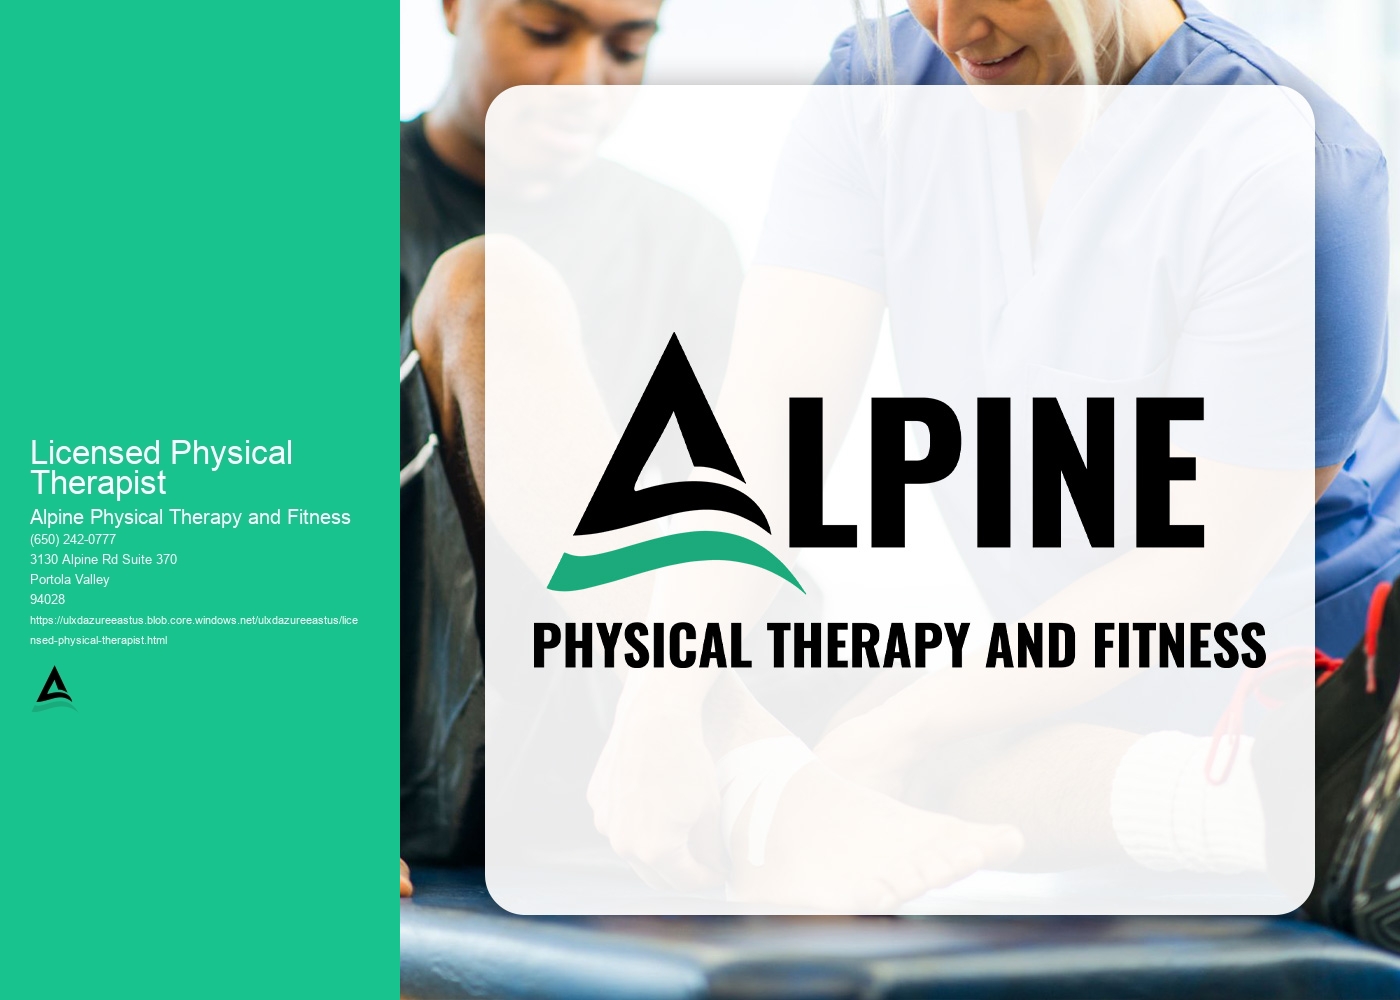 What are the key components of a comprehensive physical therapy program for individuals recovering from a stroke or neurological injury?